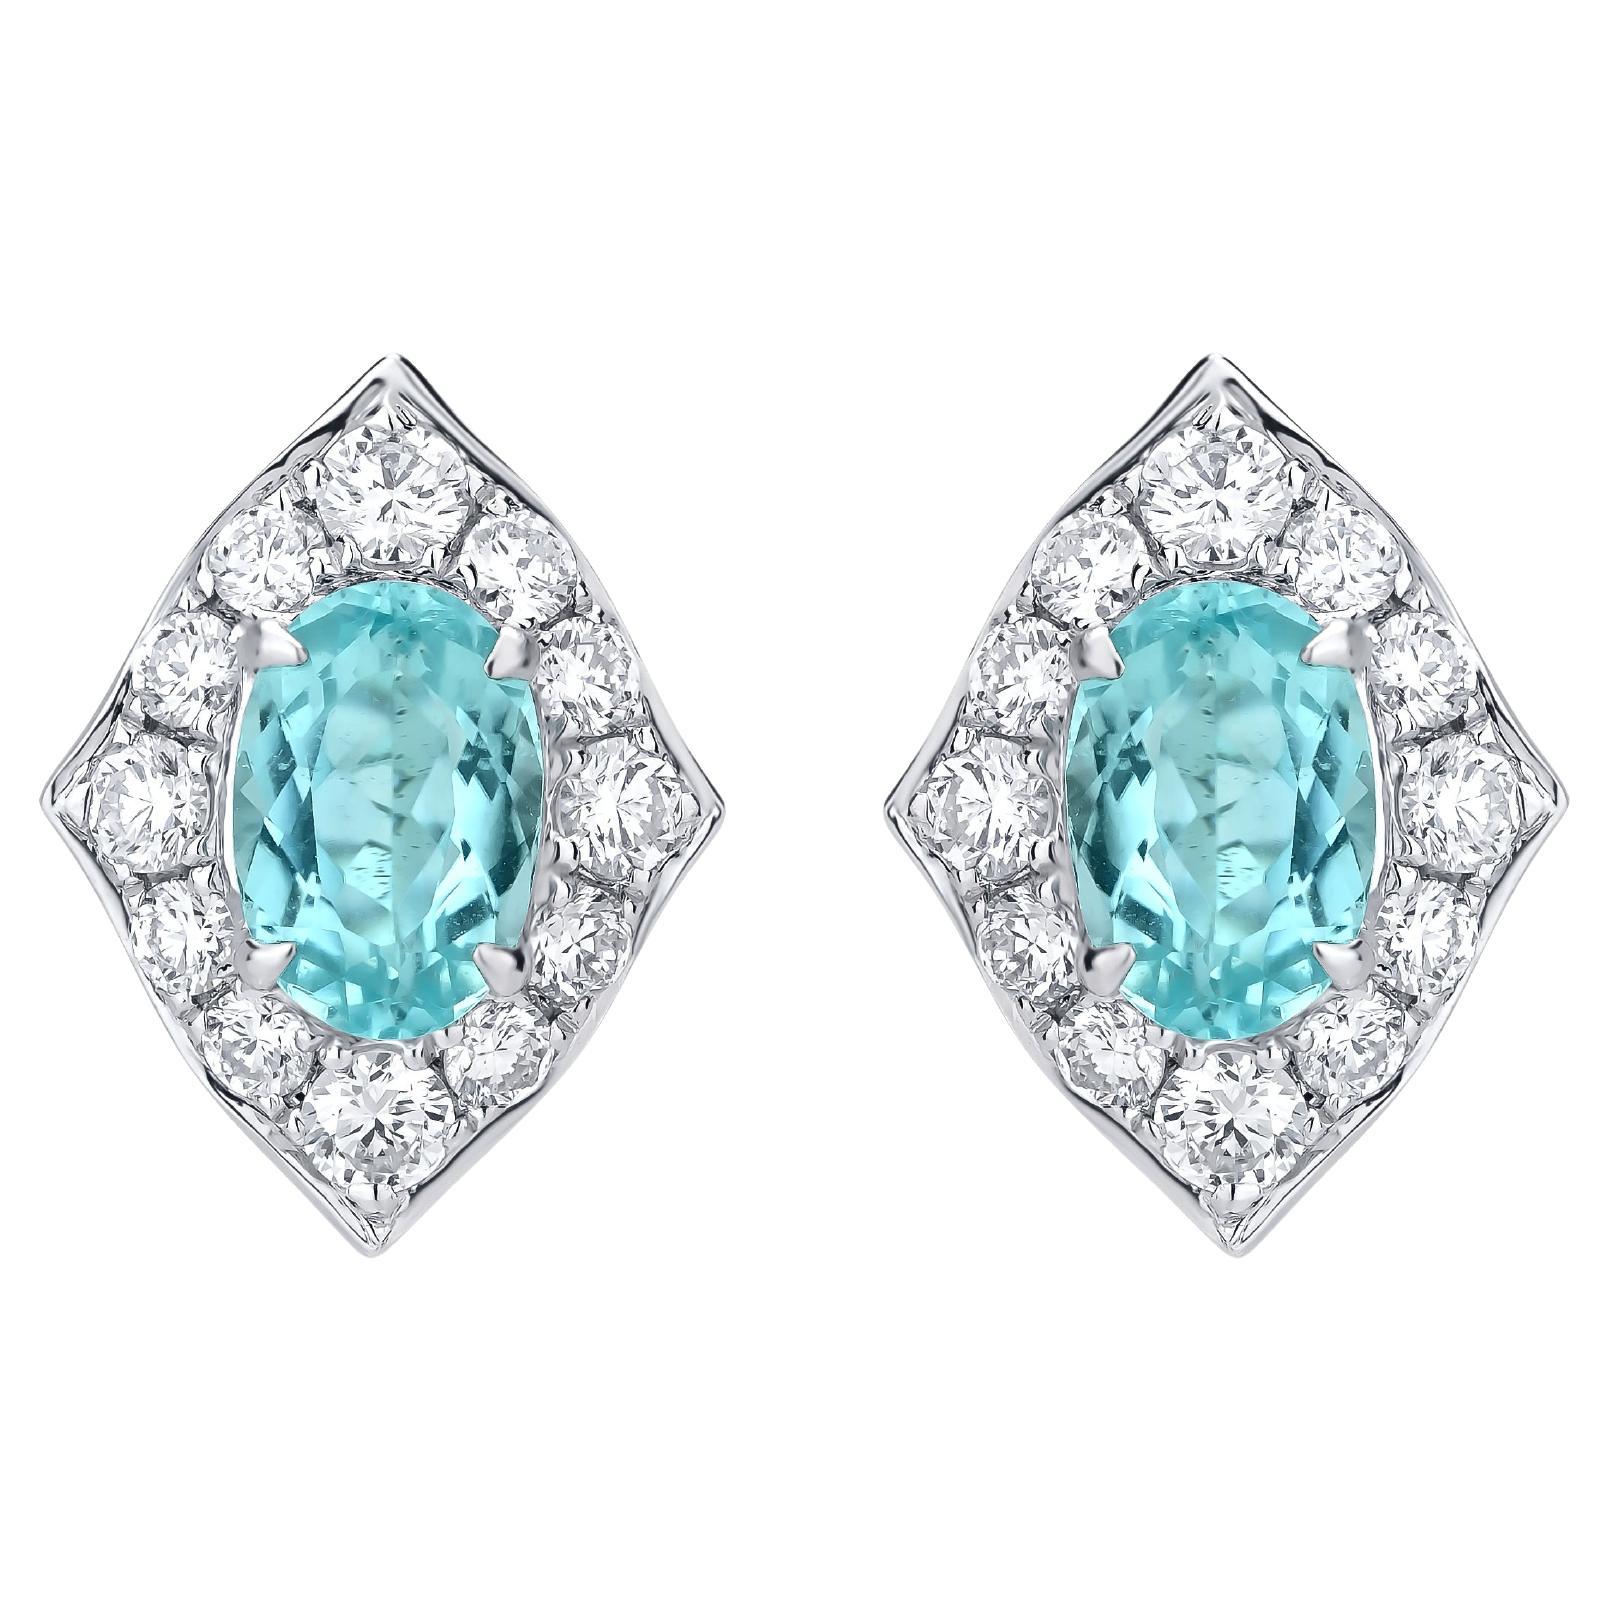 Nigaam 1.25 Cts. Paraiba and 0.66 Cts. Diamond Stud Earrings in 18K White Gold